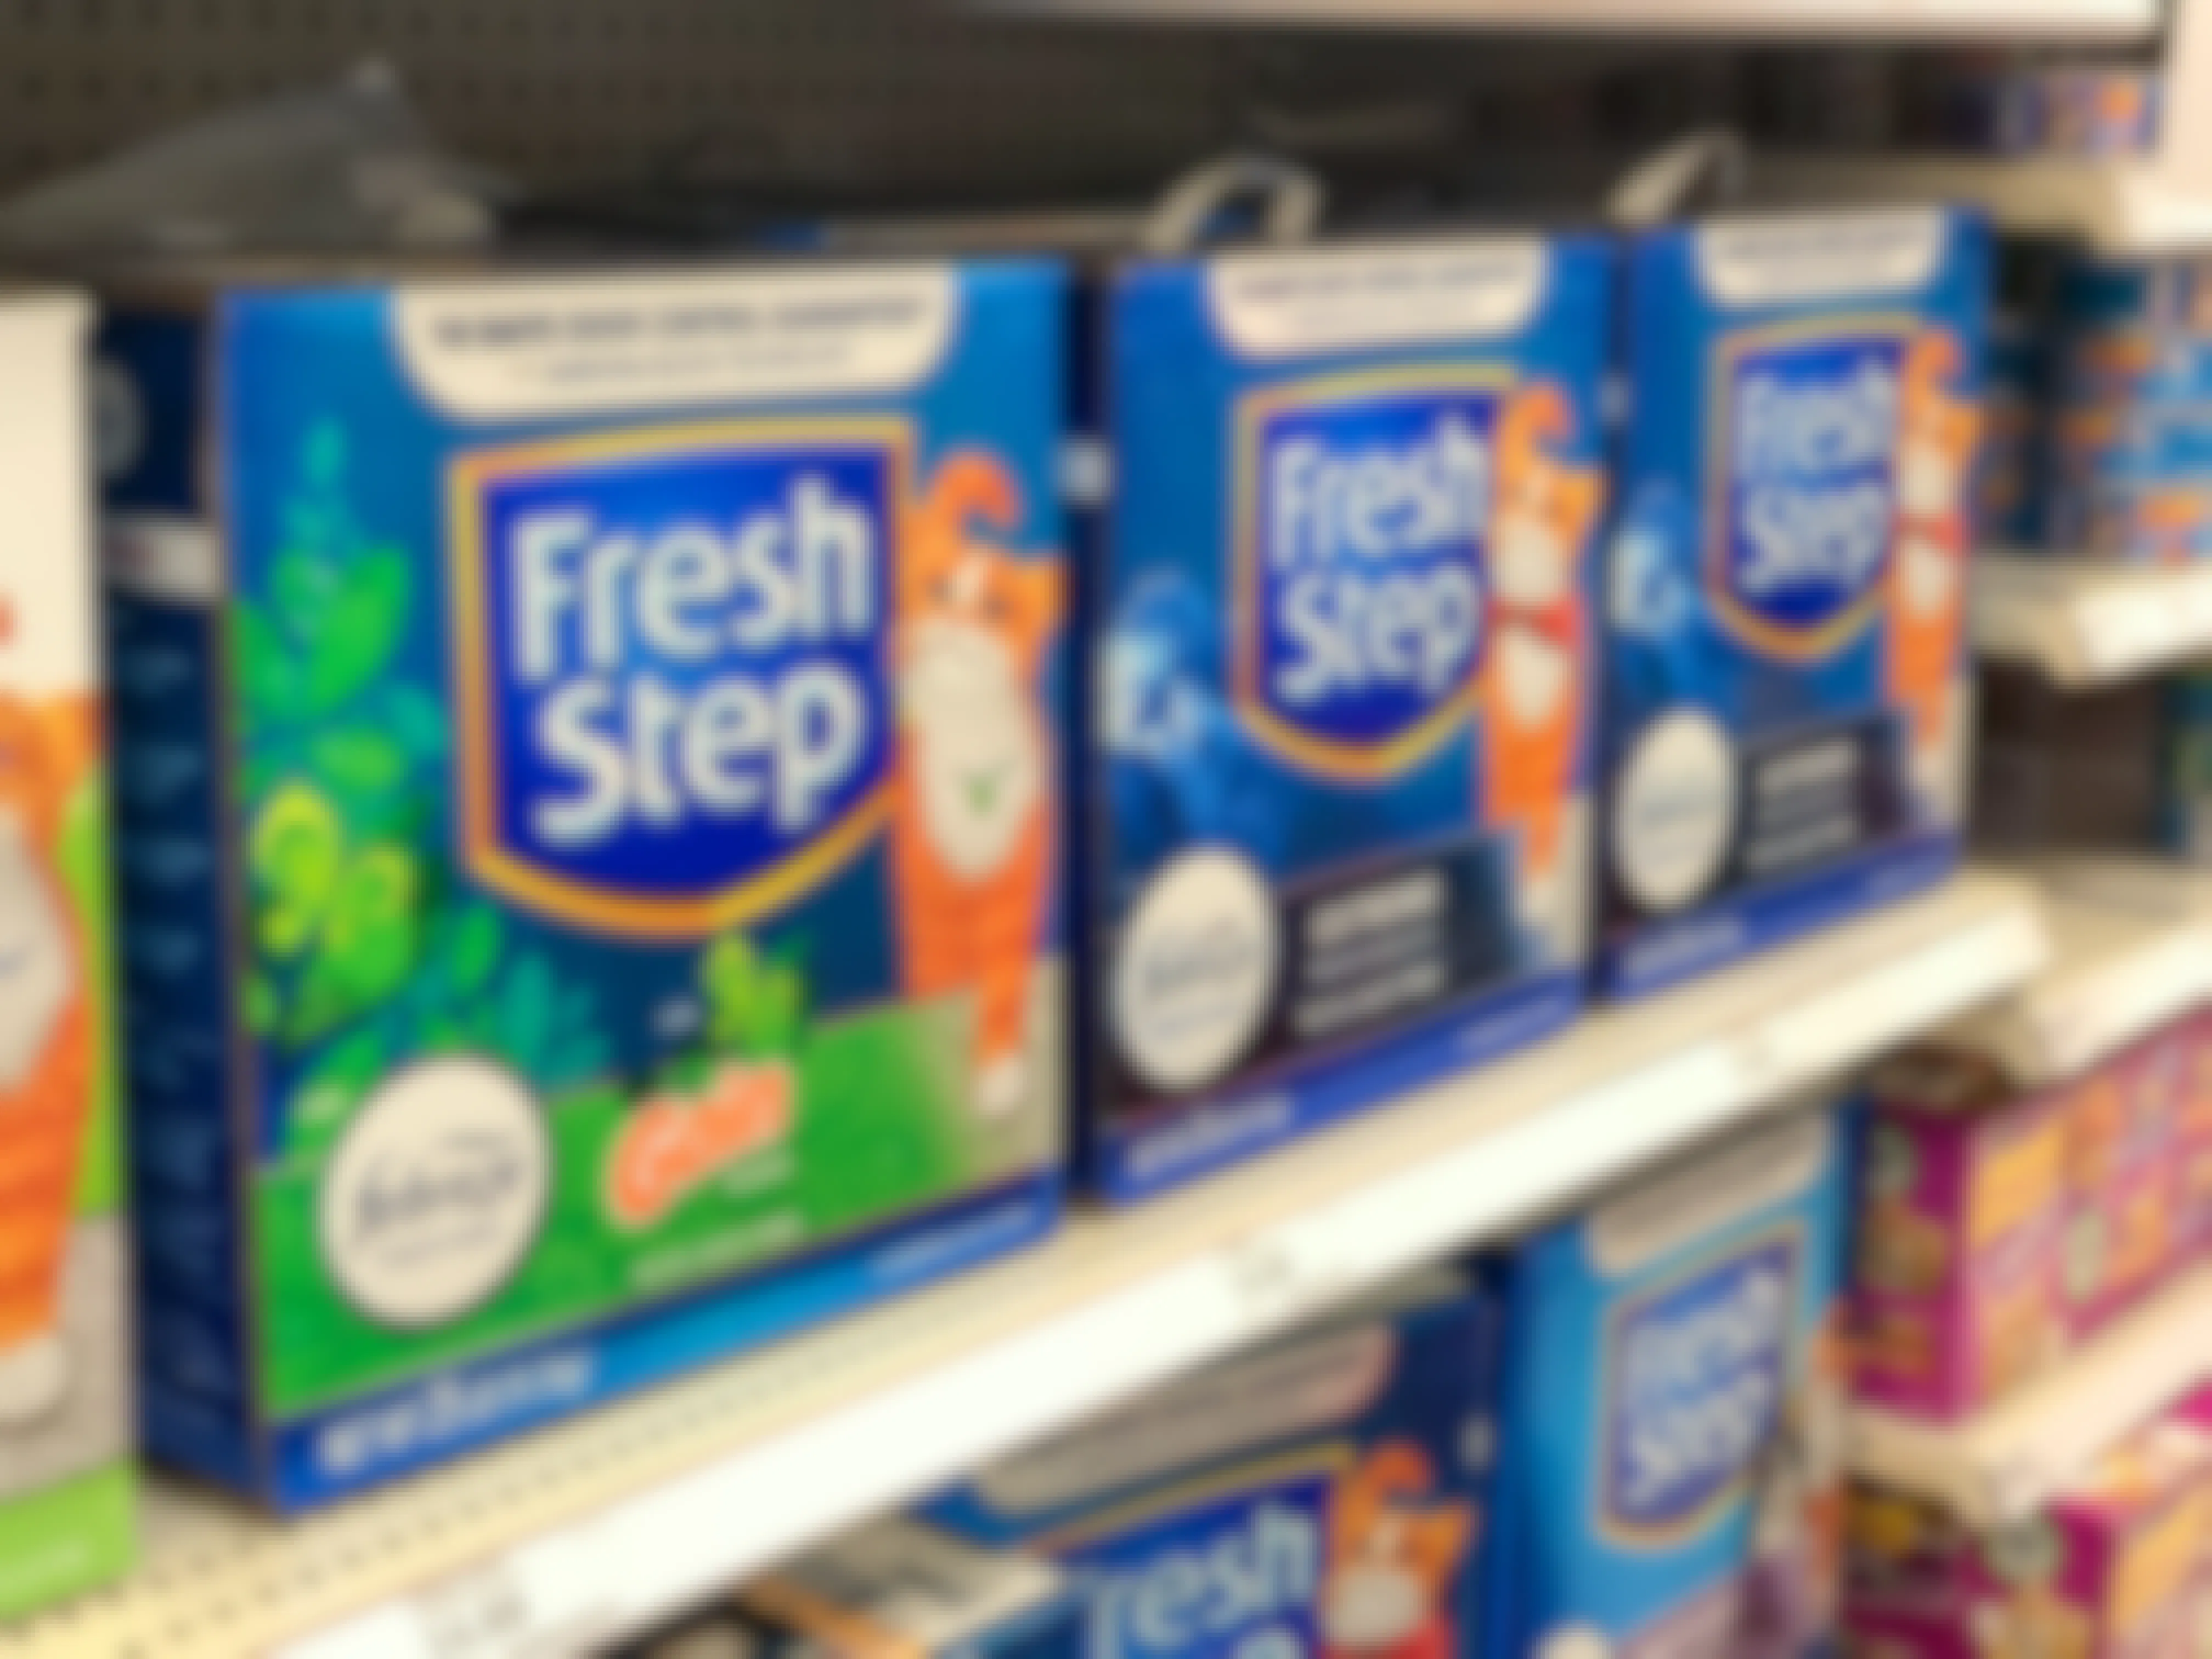 Fresh Step cat litter in a store aisle